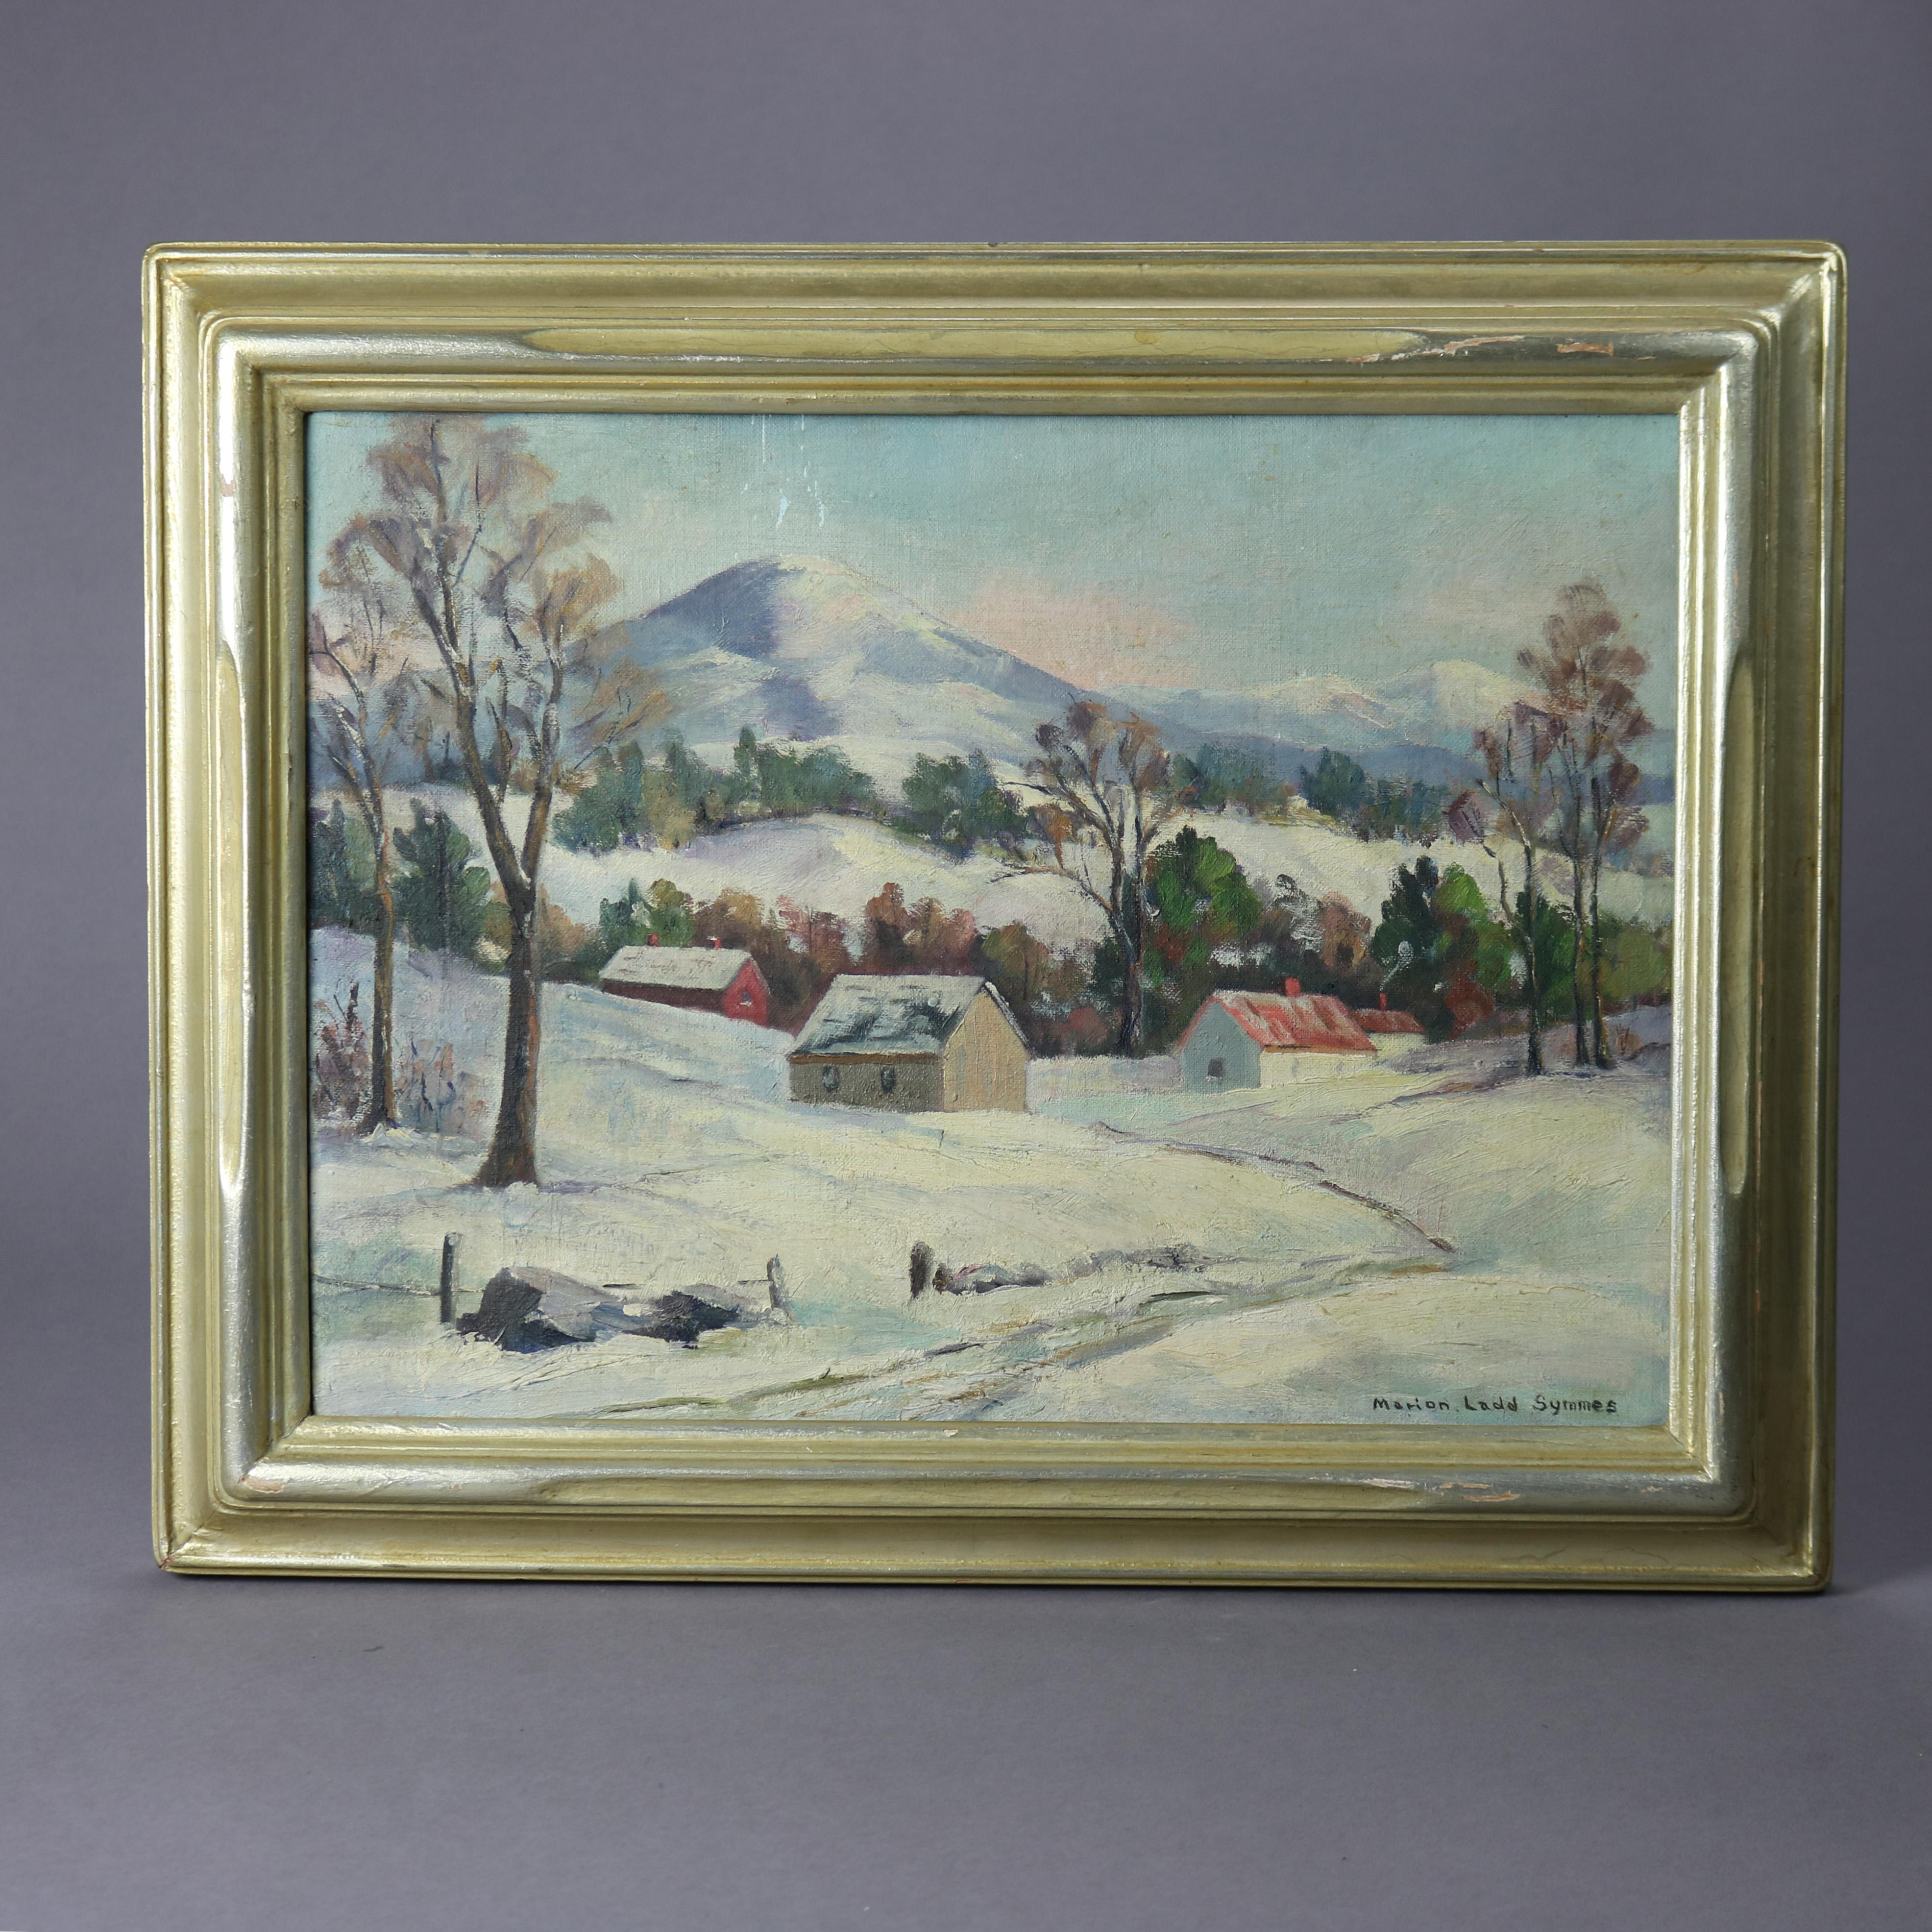 An antique landscape painting offers oil on board landscape scene in the manner of the New Hope School titled Mt. Antrim, NH, signed by Marion Ladd Symmes, seated in giltwood frame, circa 1910

Measures - 15.25